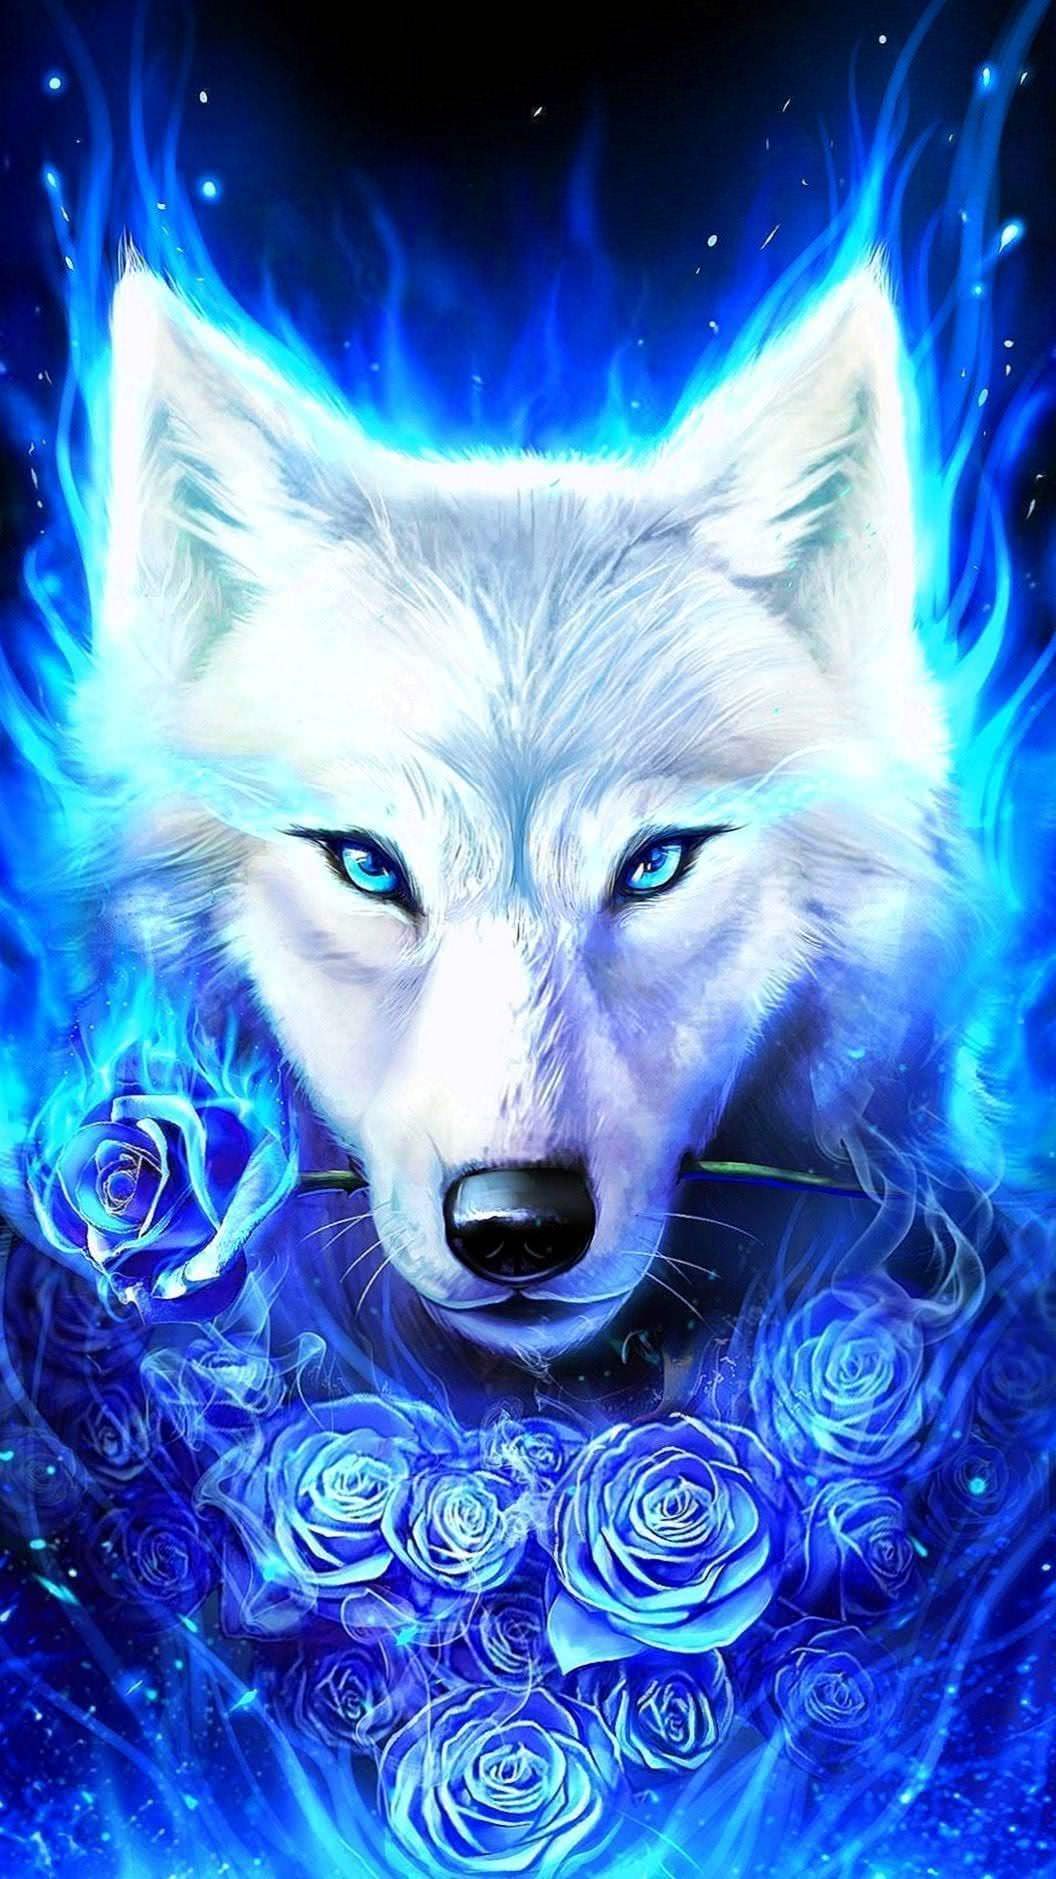 Wallpapers HD Ice Wolf